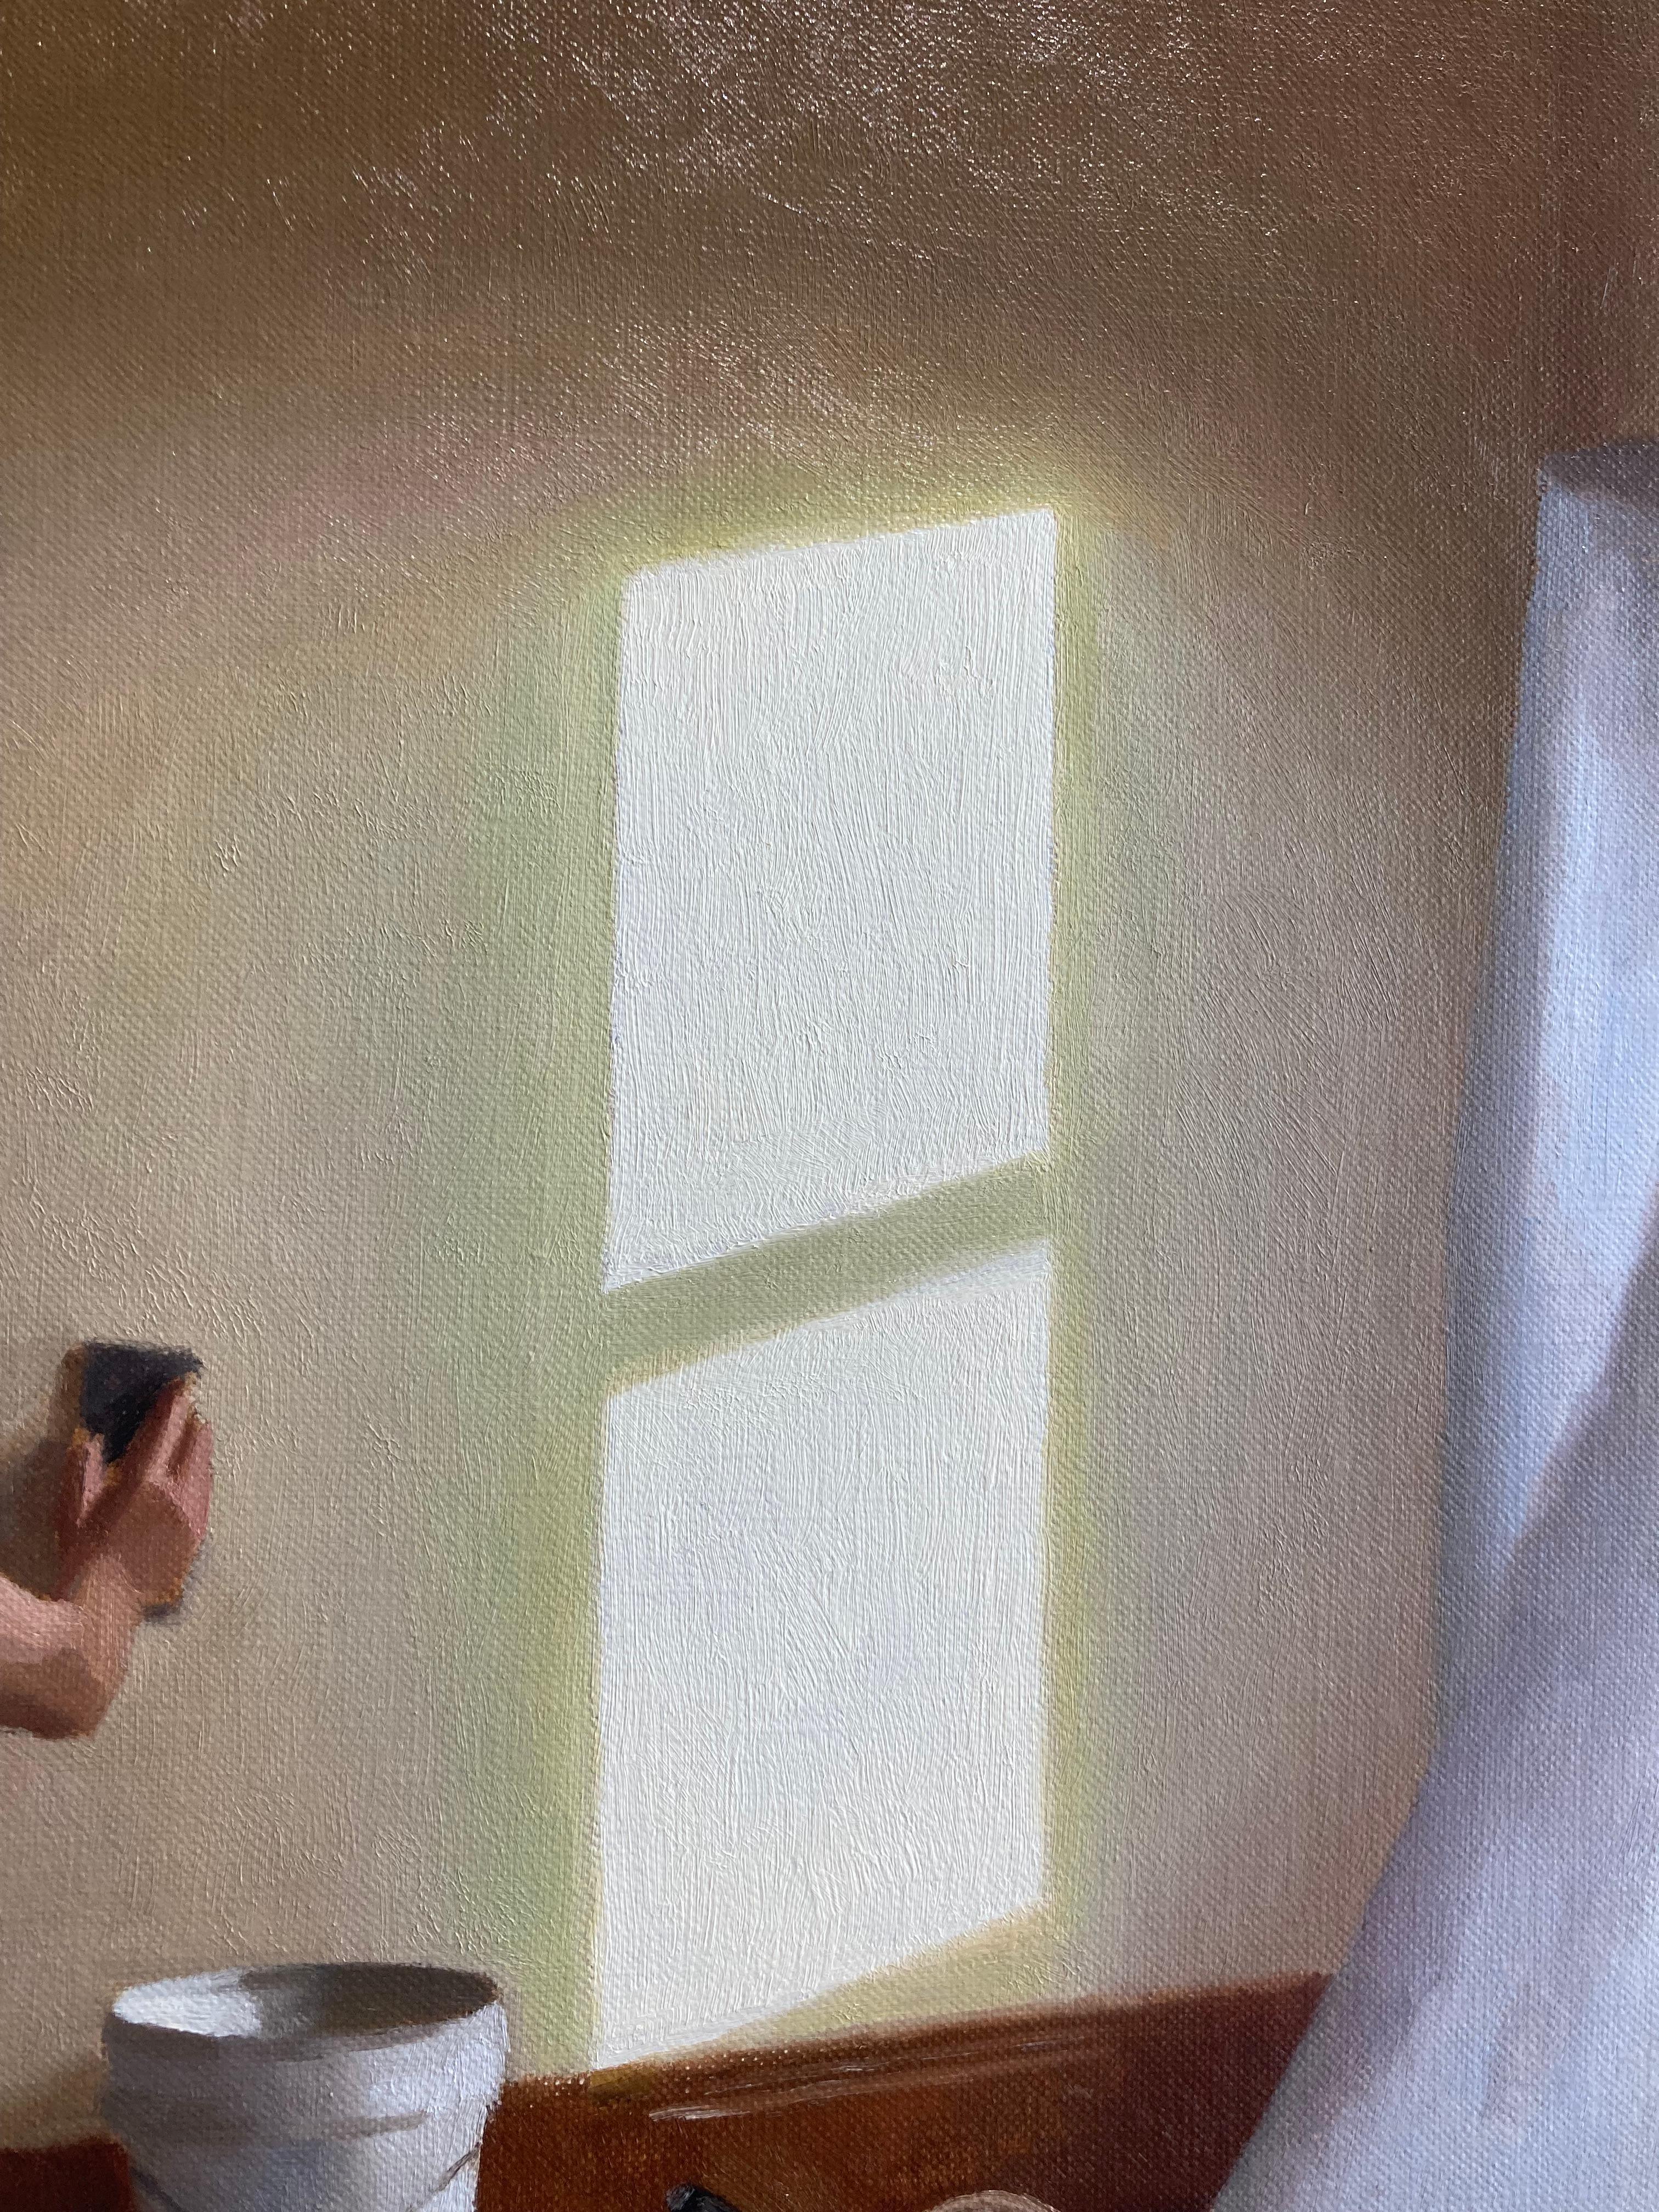 An oil painting by American Realist painter, Steven J. Levin. 

A male figure sits alone in a room, sanding the wall. Clearly preparing the room for refurbishment, a white tarp is cast along the floor, beneath his work area, and up to an open